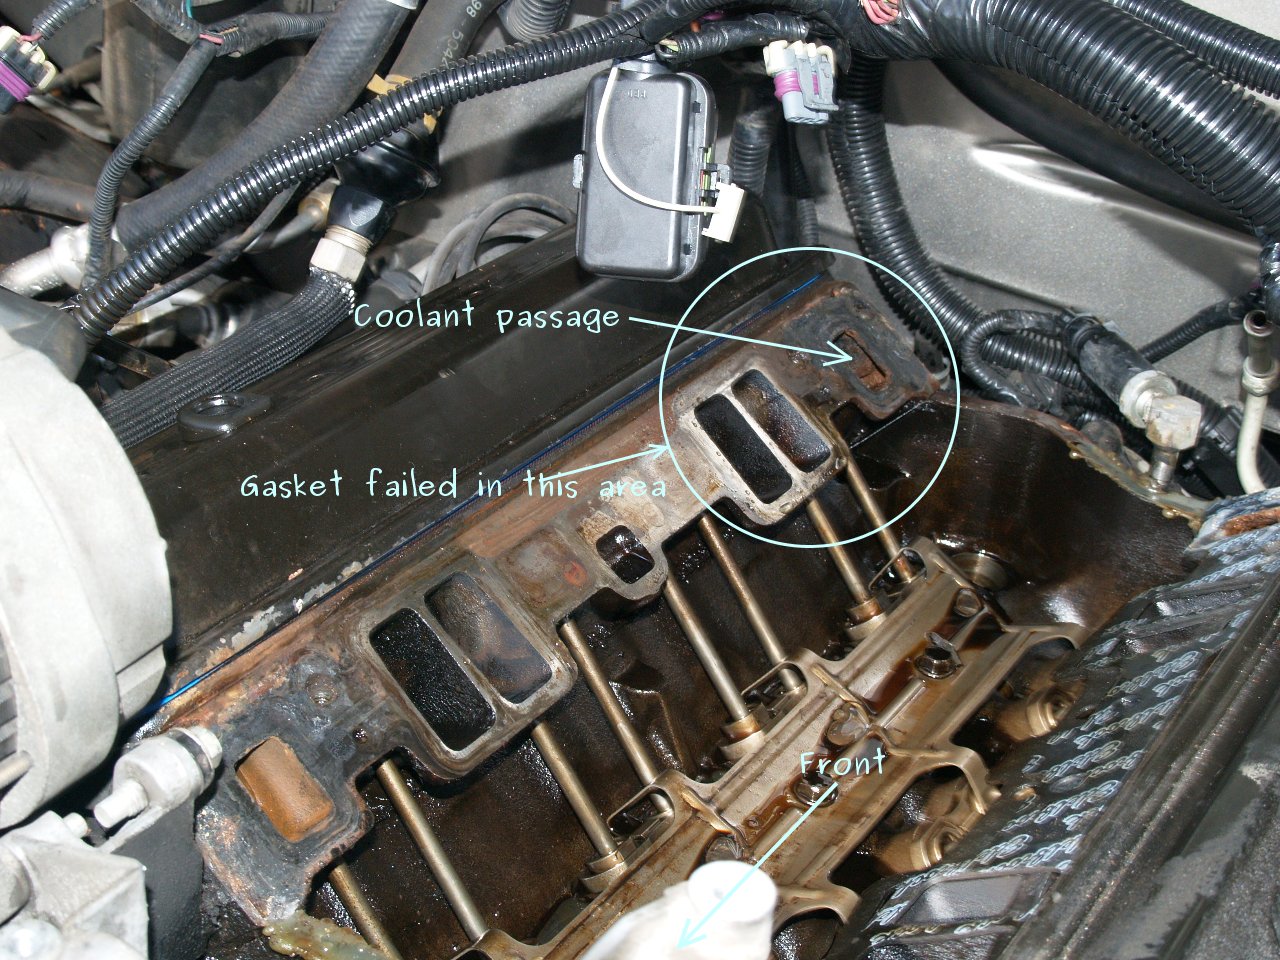 See P0698 in engine